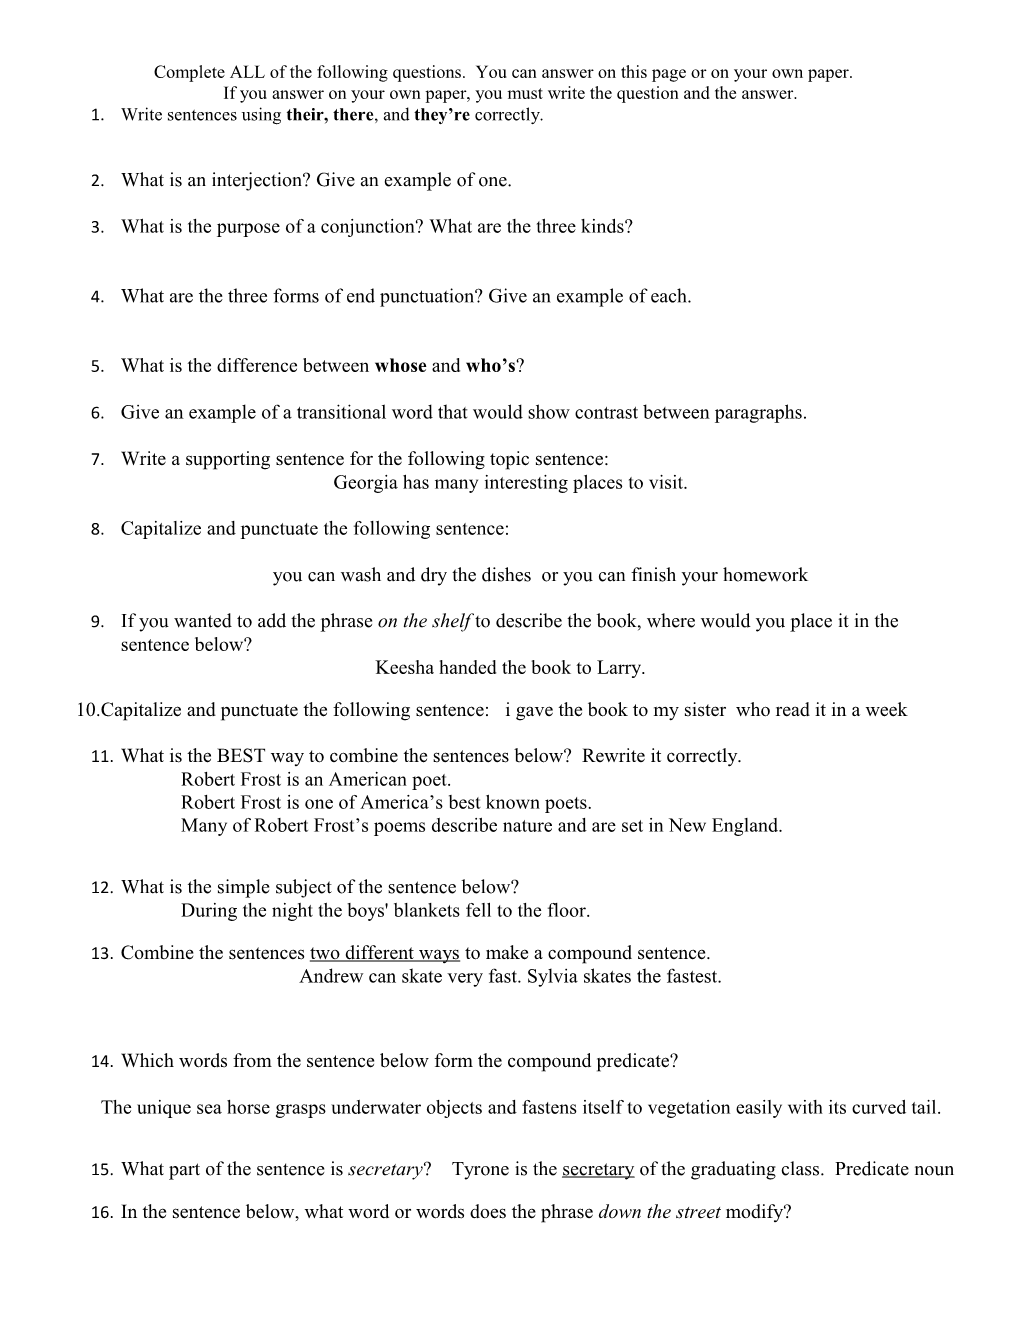 Complete ALL of the Following Questions. You Can Answer on This Page Or on Your Own Paper